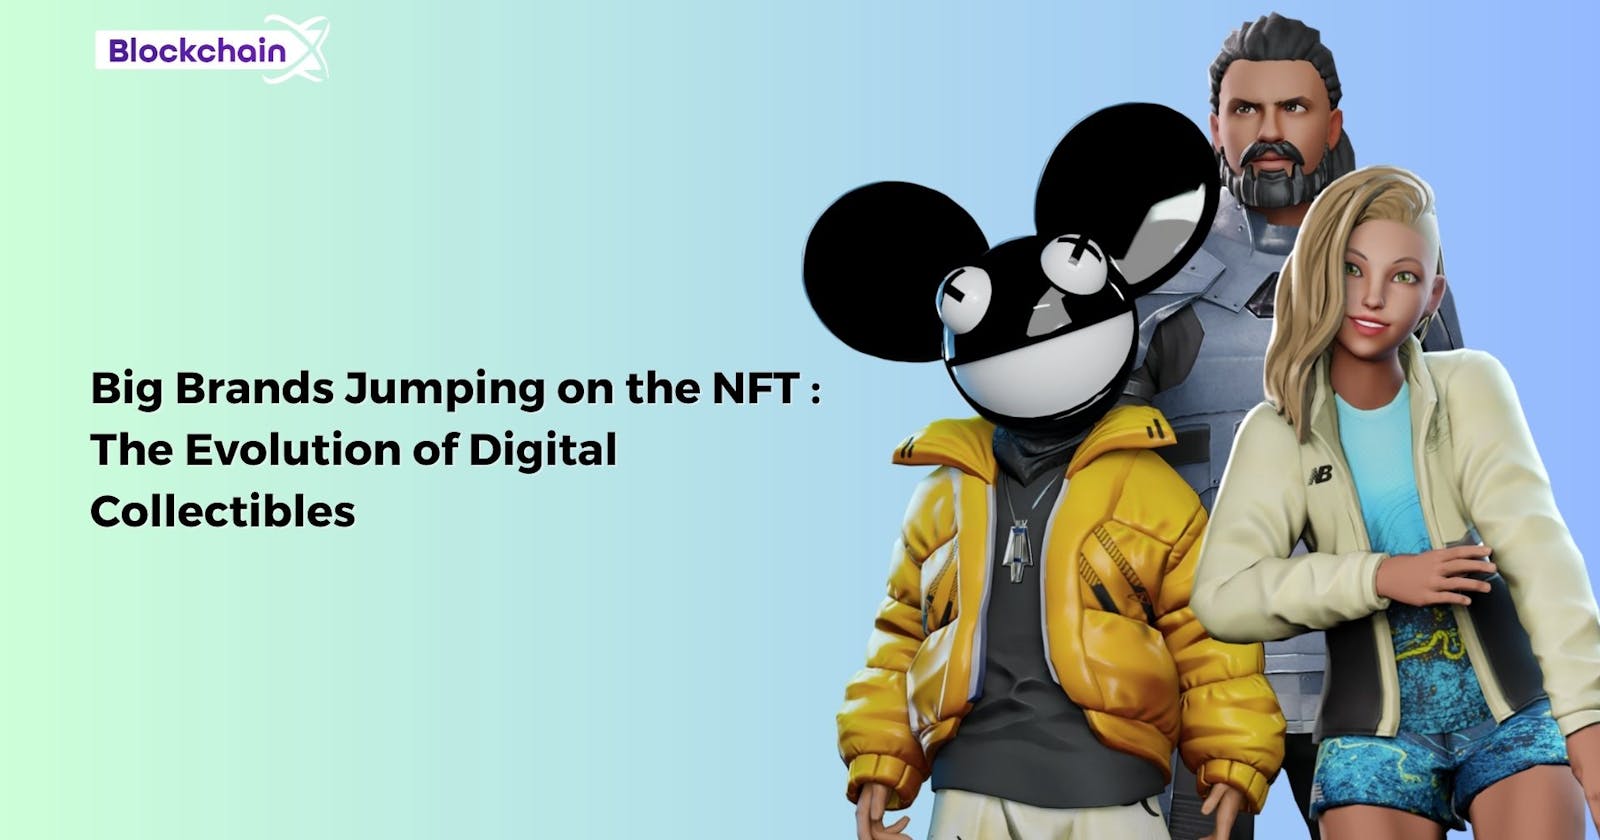 Big Brands Jumping on the NFT : The Evolution of Digital Collectibles